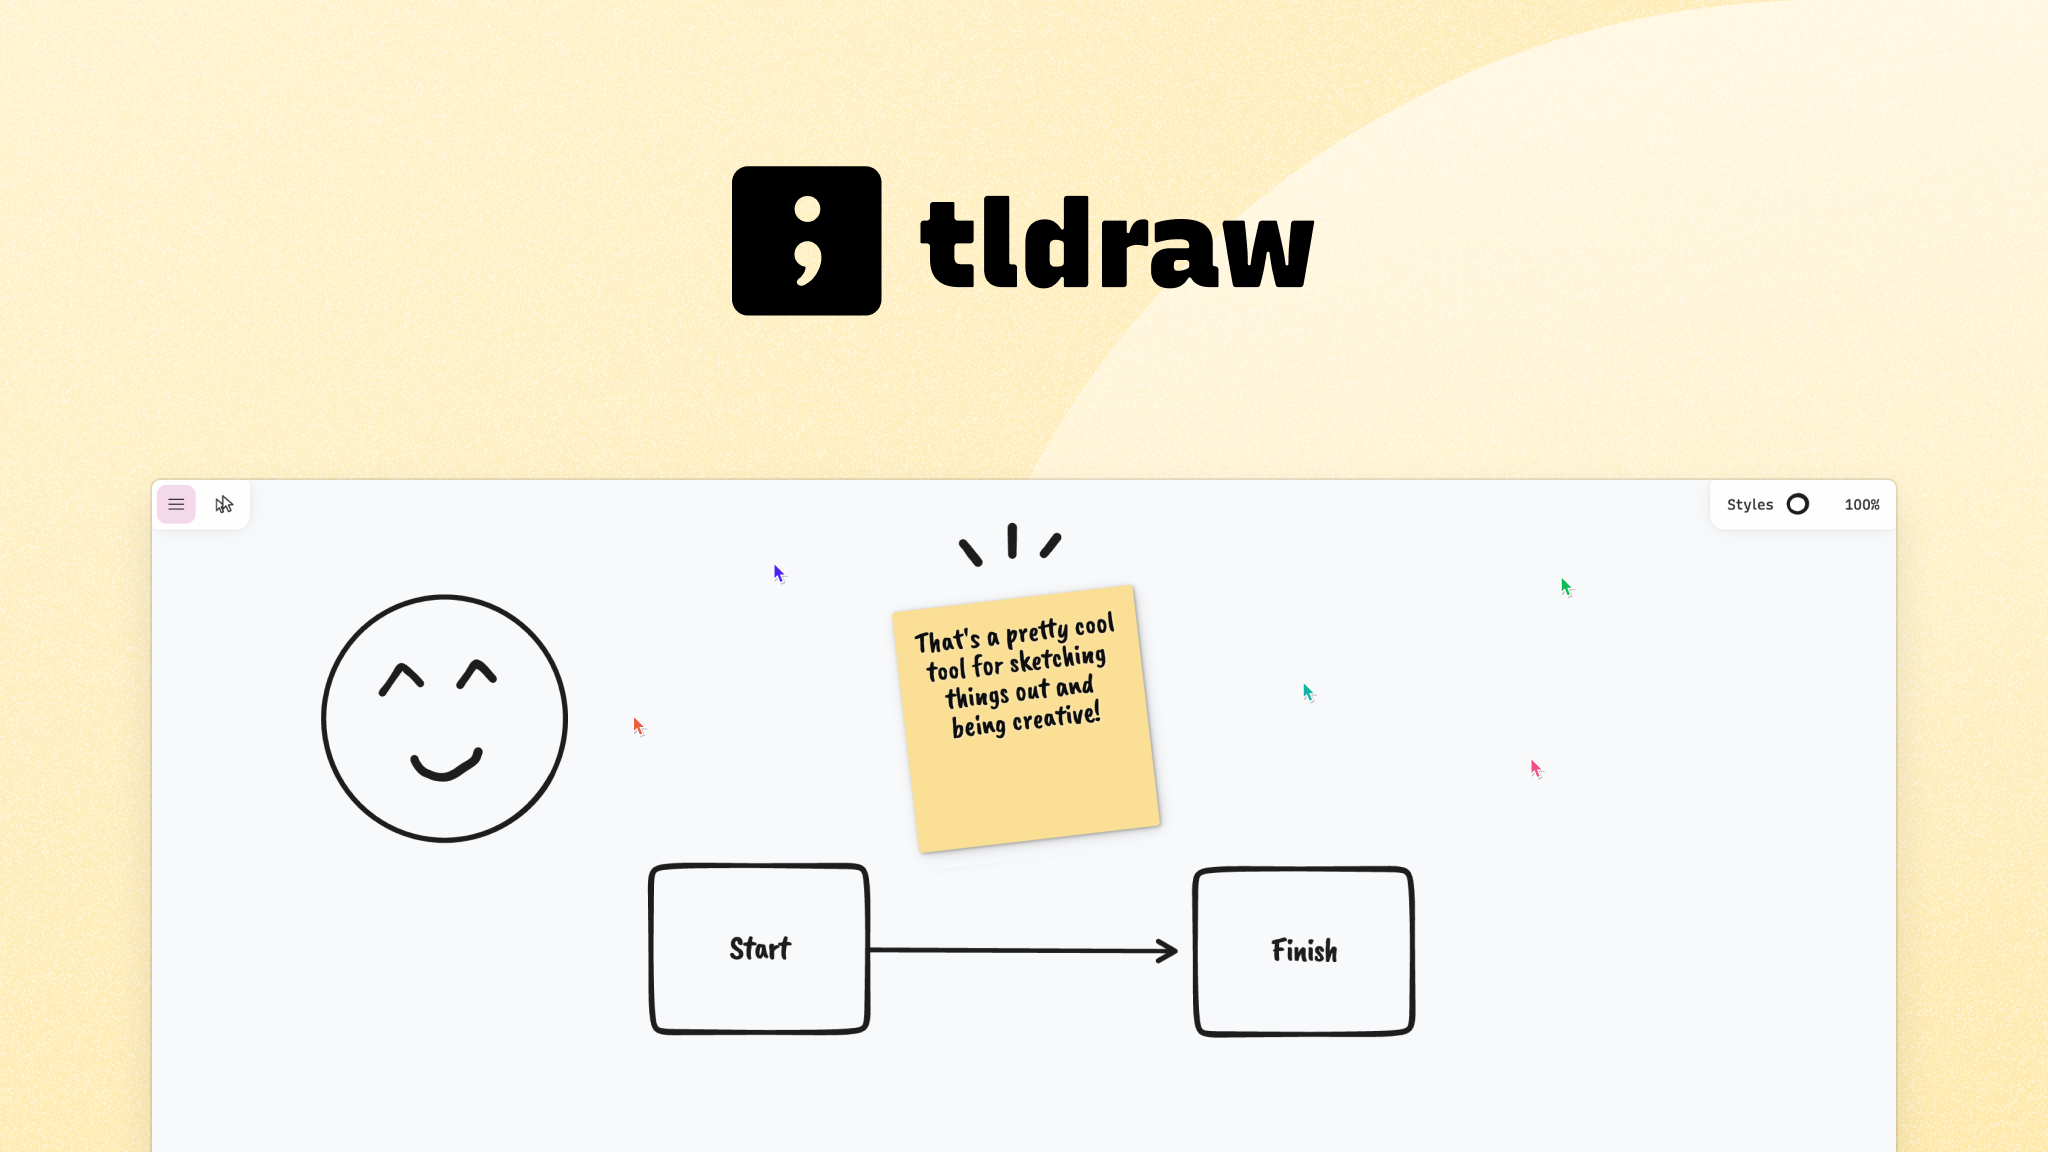 Tldraw became viral by converting its product to multiplayer with